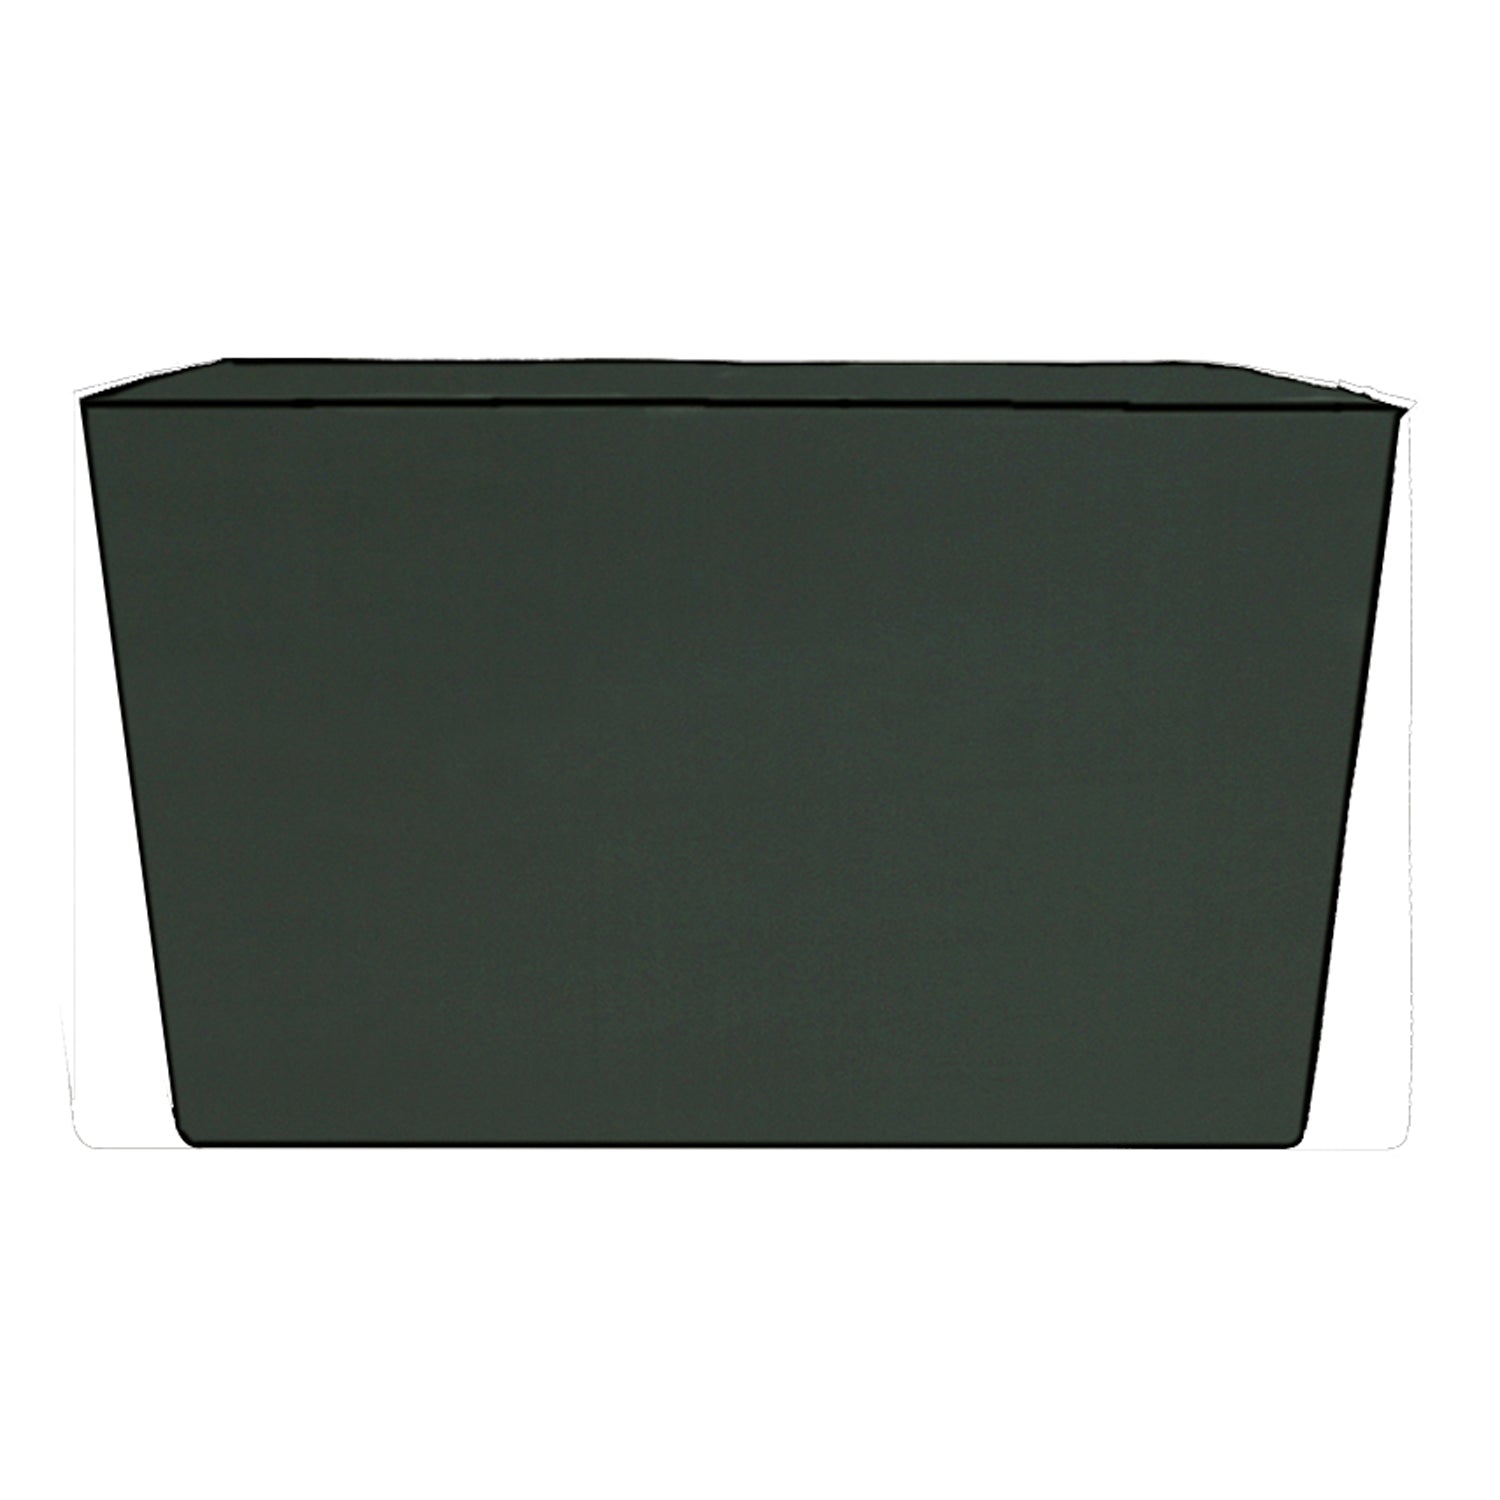 Waterproof and Dustproof Split Outdoor AC Cover, Military - Dream Care Furnishings Private Limited